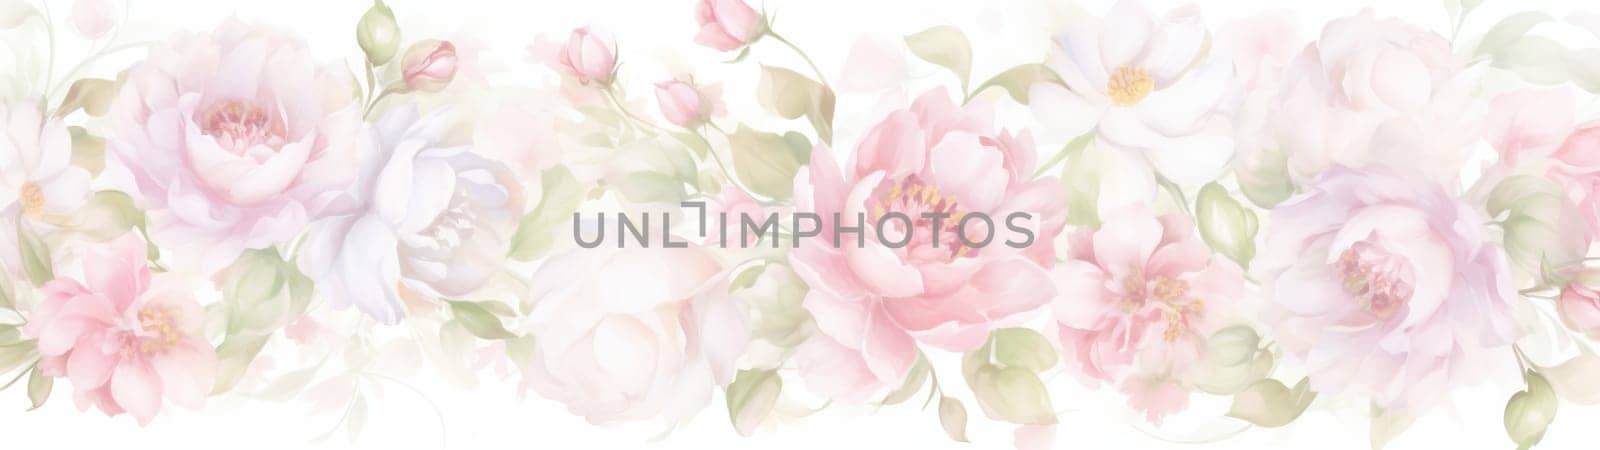 Floral watercolour background by palinchak